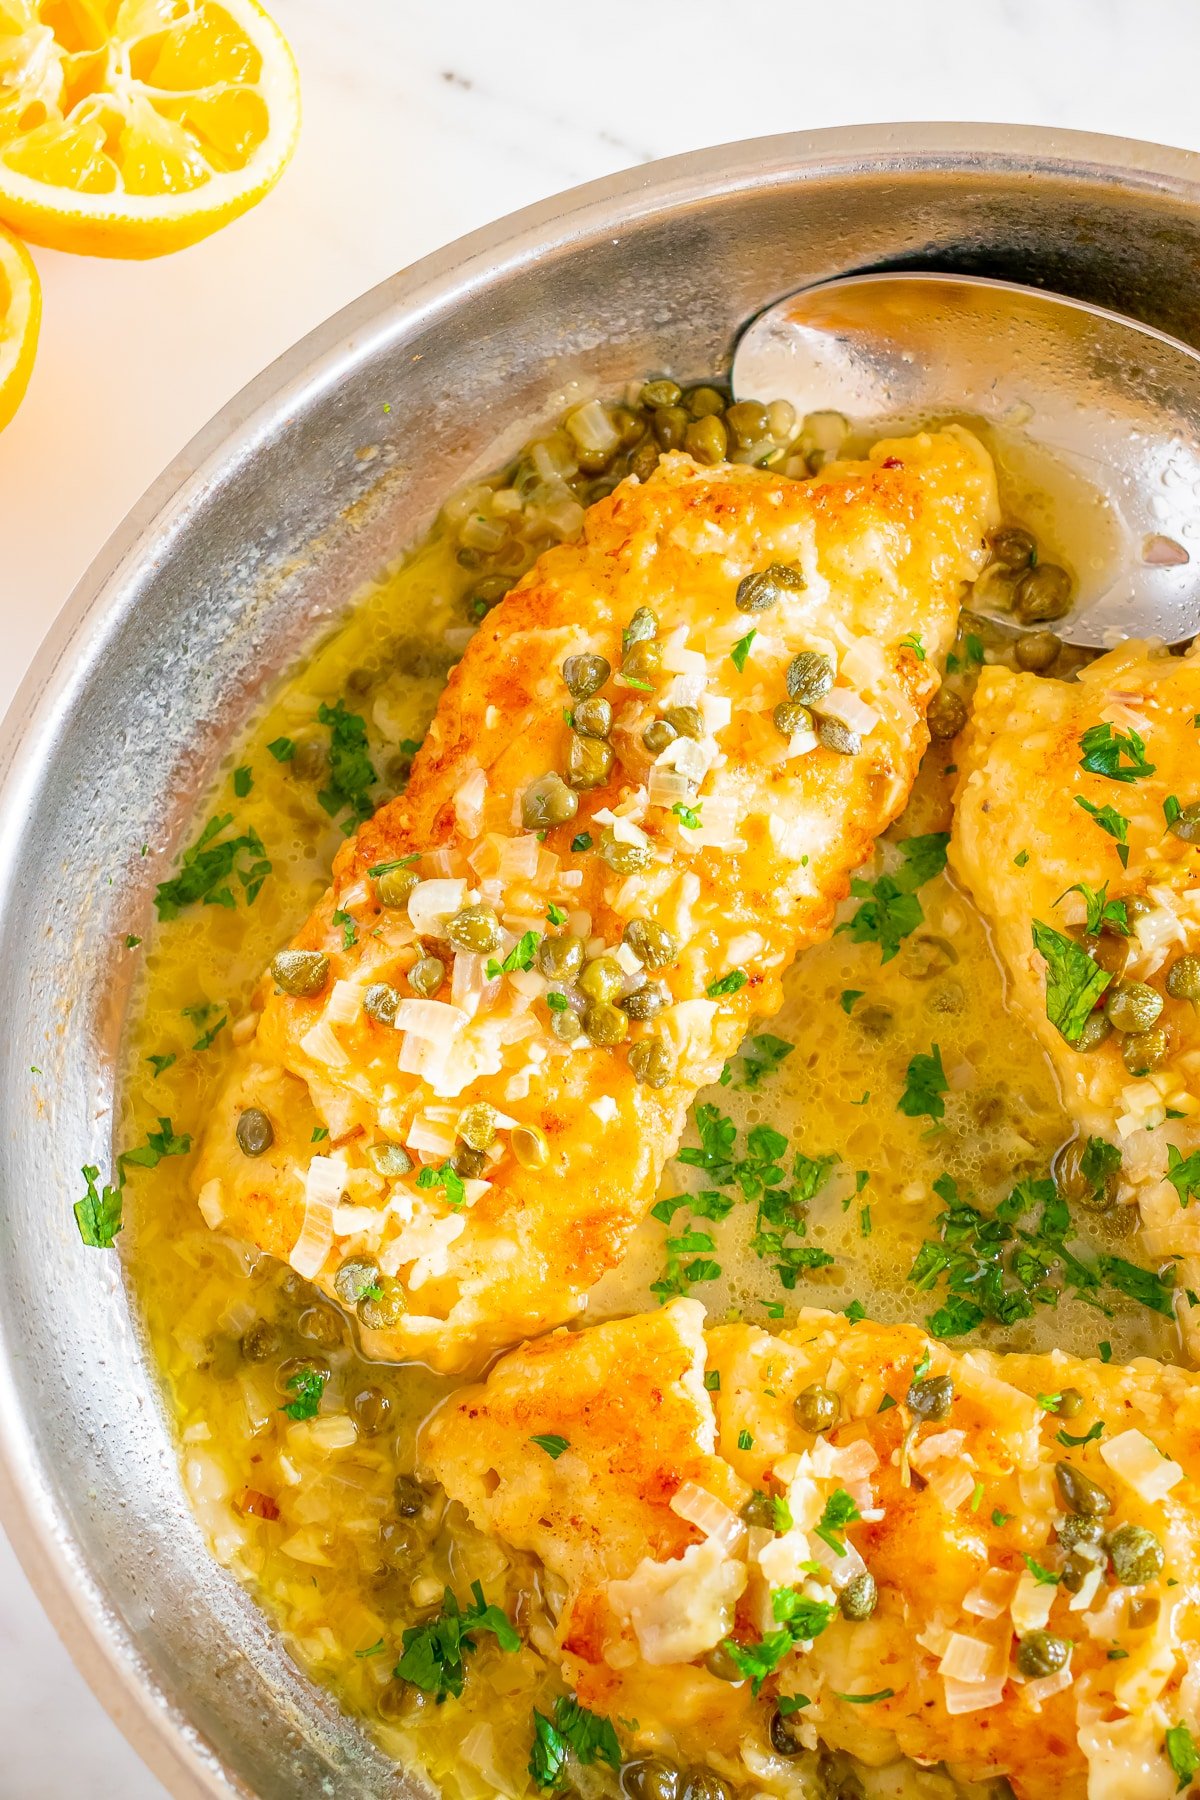 Fish piccata shown in a silver skillet, up close photo